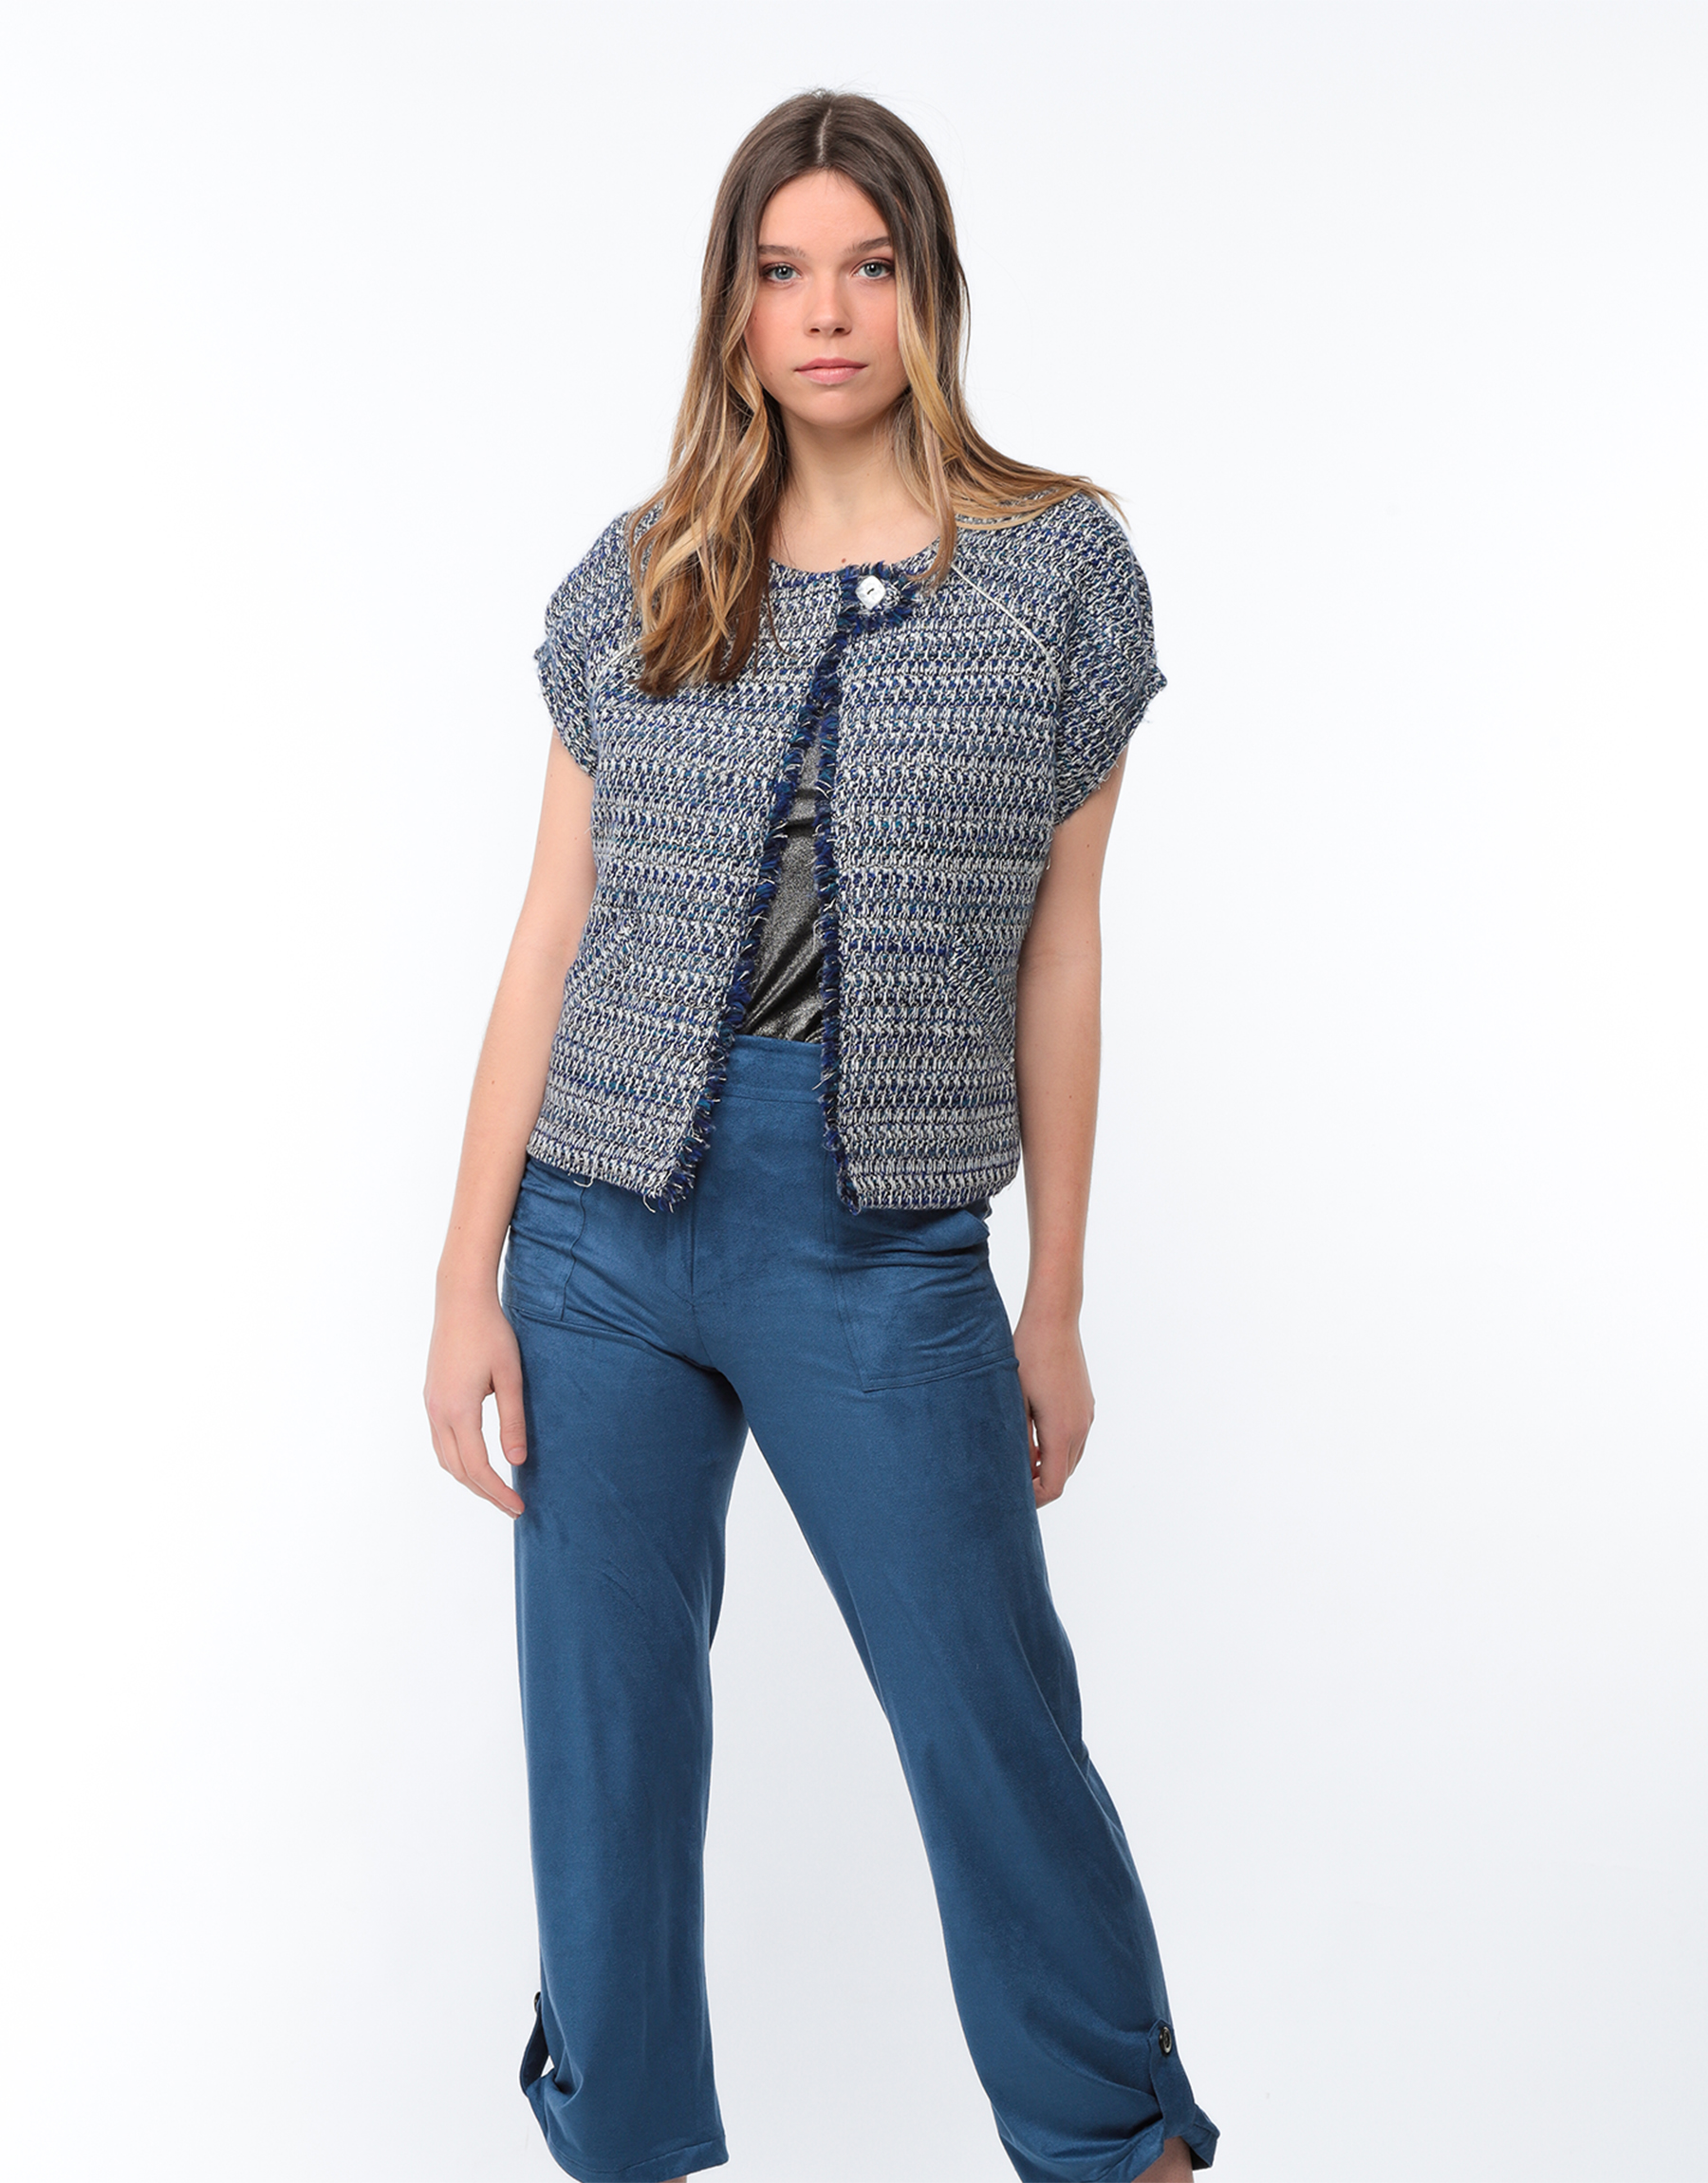 Short sleeve jacket in blue and white tweed 